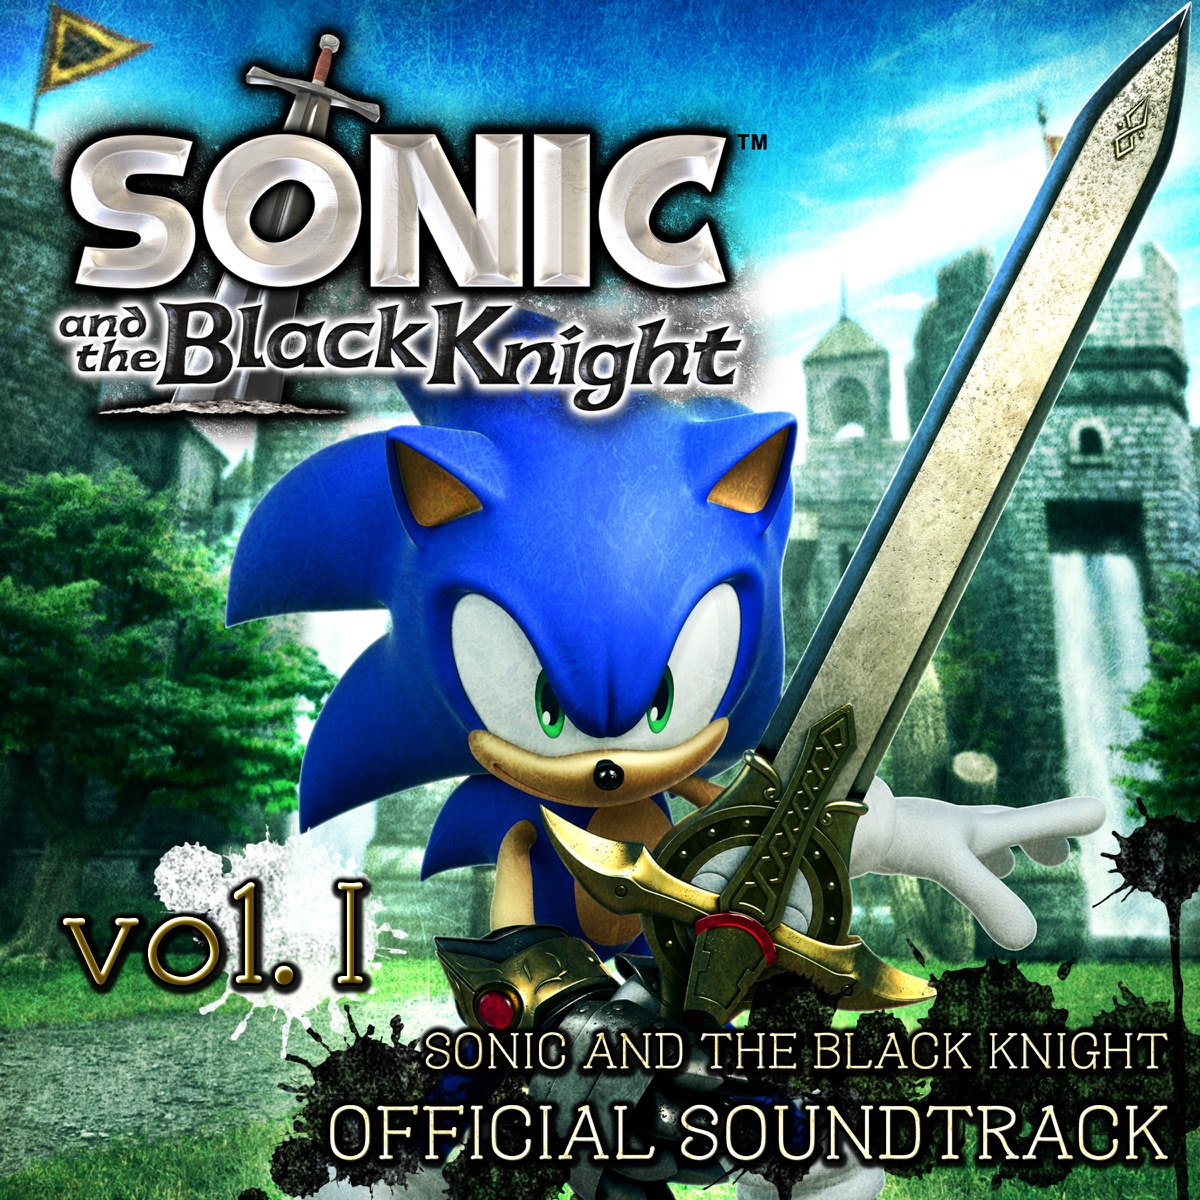 Sonic Generations Official Soundtrack, Vol. 1 - Album by Various 